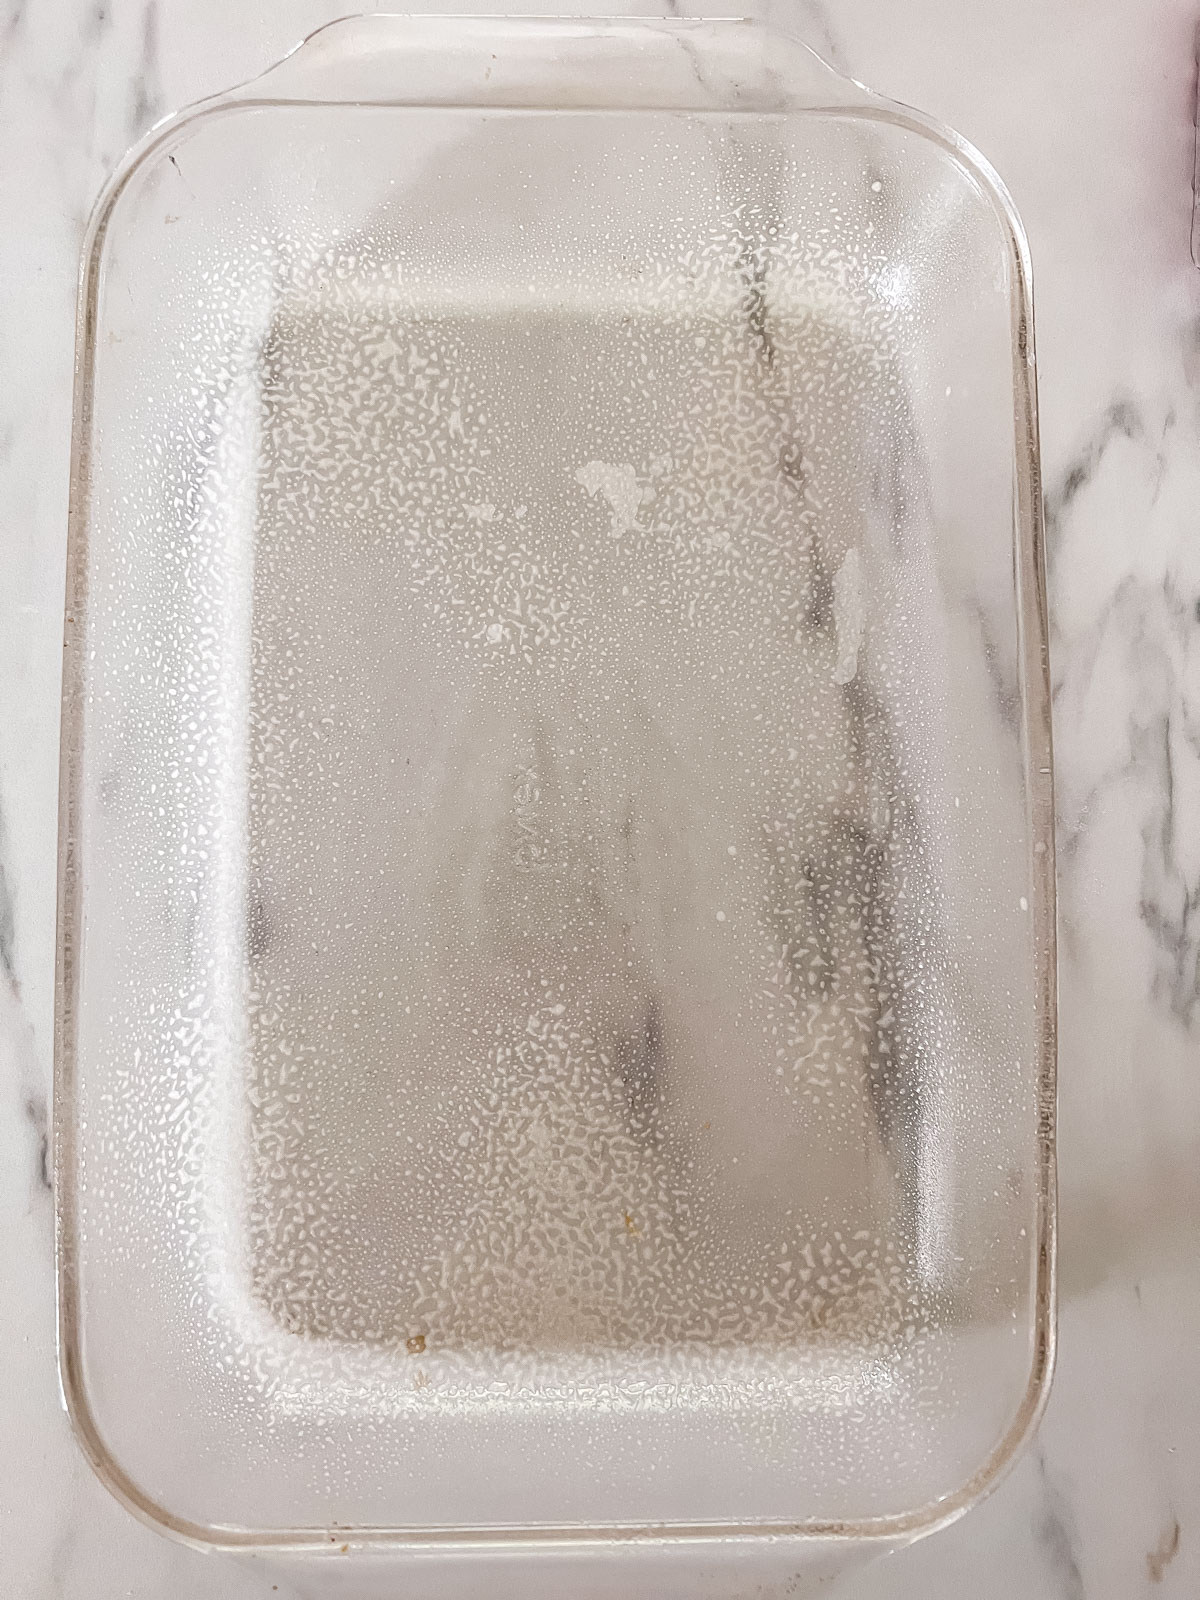 A 9x13 glass pan with cooking spray in it on a marble background.n